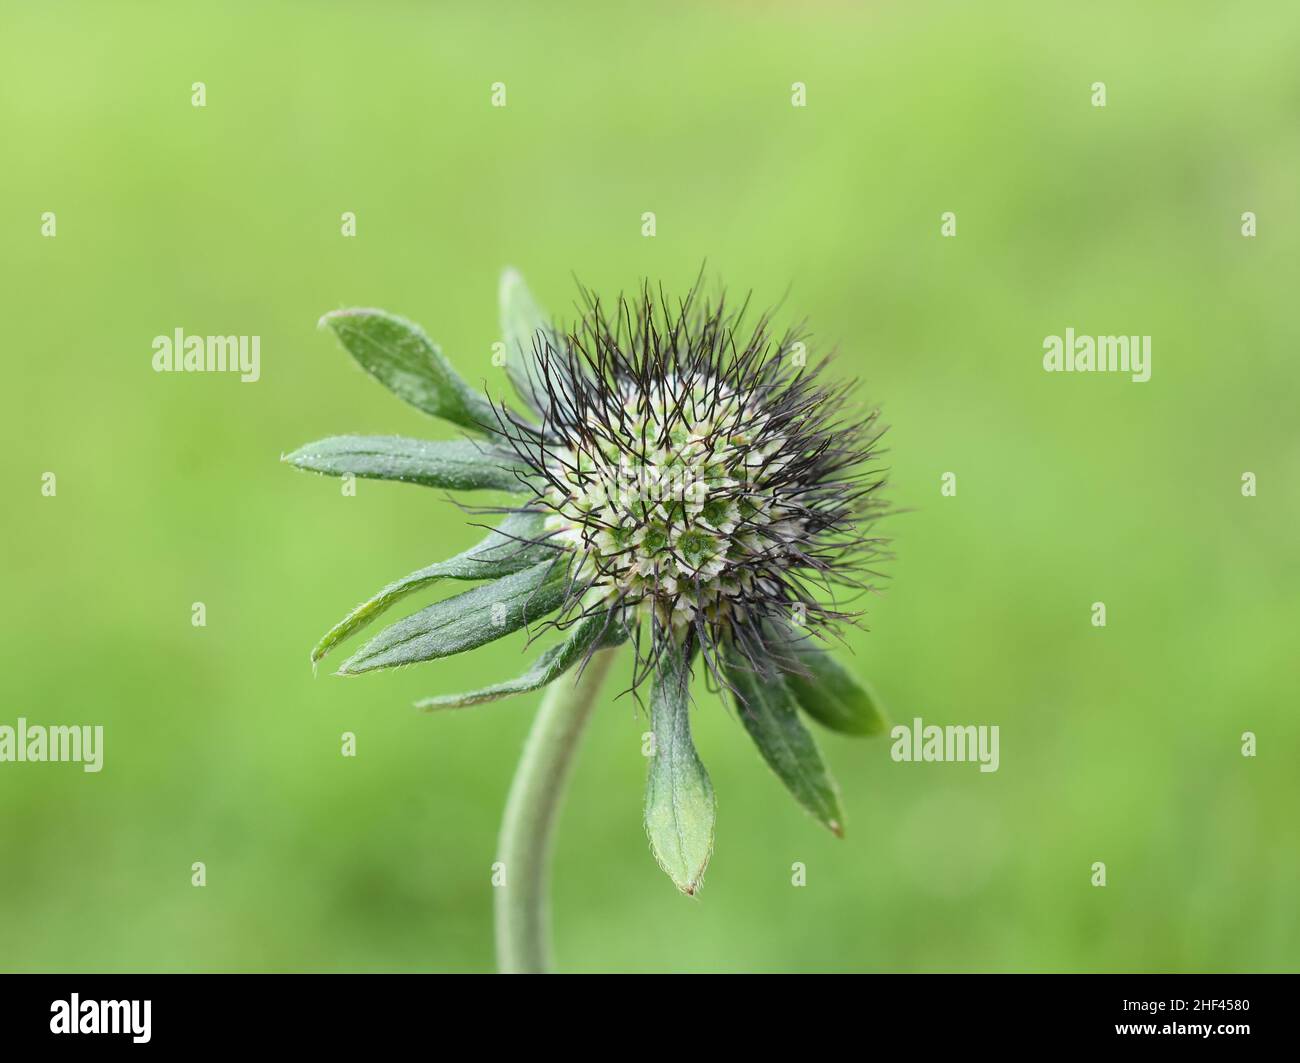 Flowered seed ball of scabiosa pincushion flower plant on green background Stock Photo